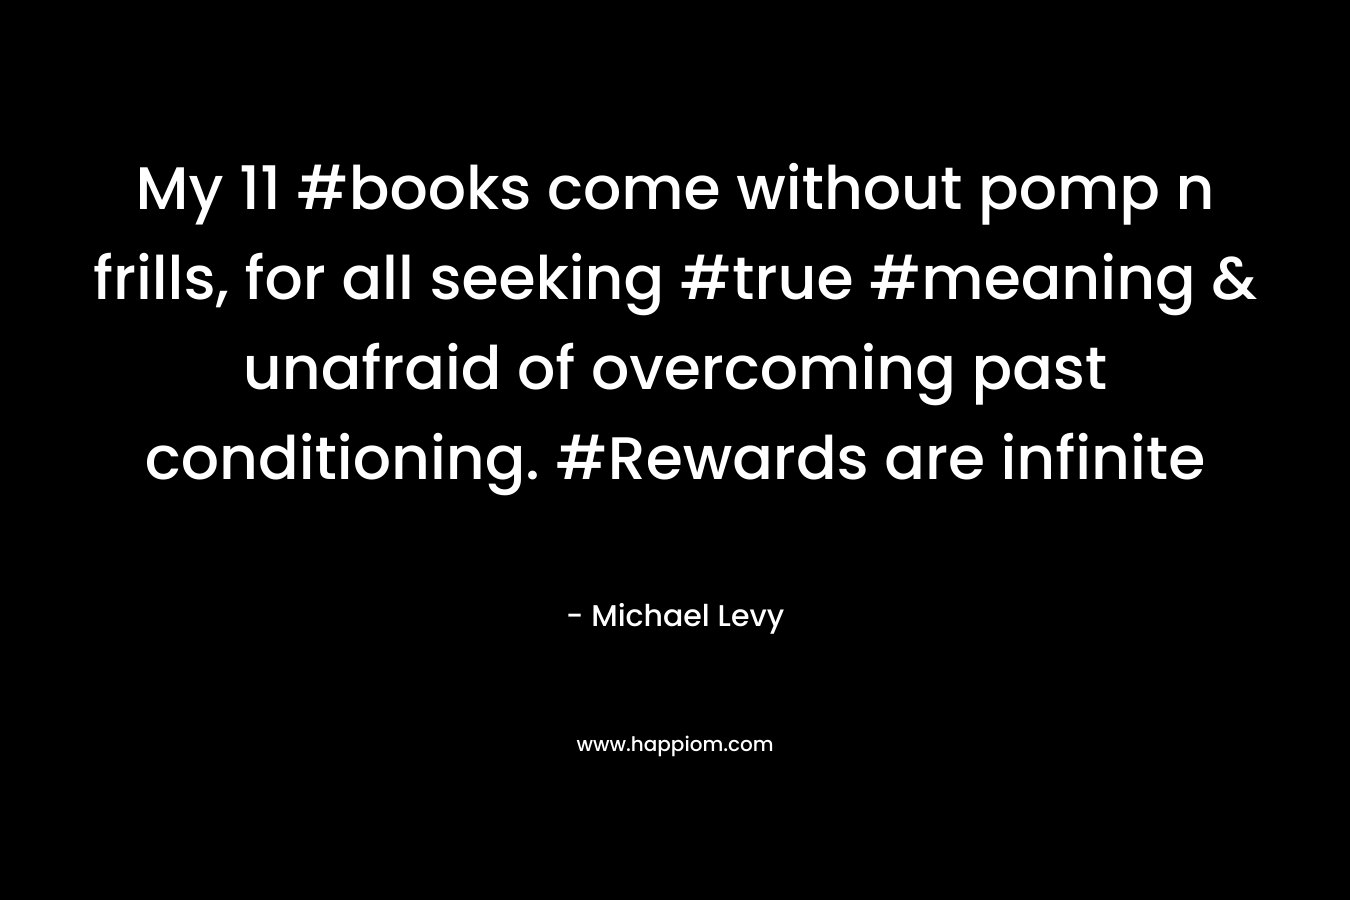 My 11 #books come without pomp n frills, for all seeking #true #meaning & unafraid of overcoming past conditioning. #Rewards are infinite